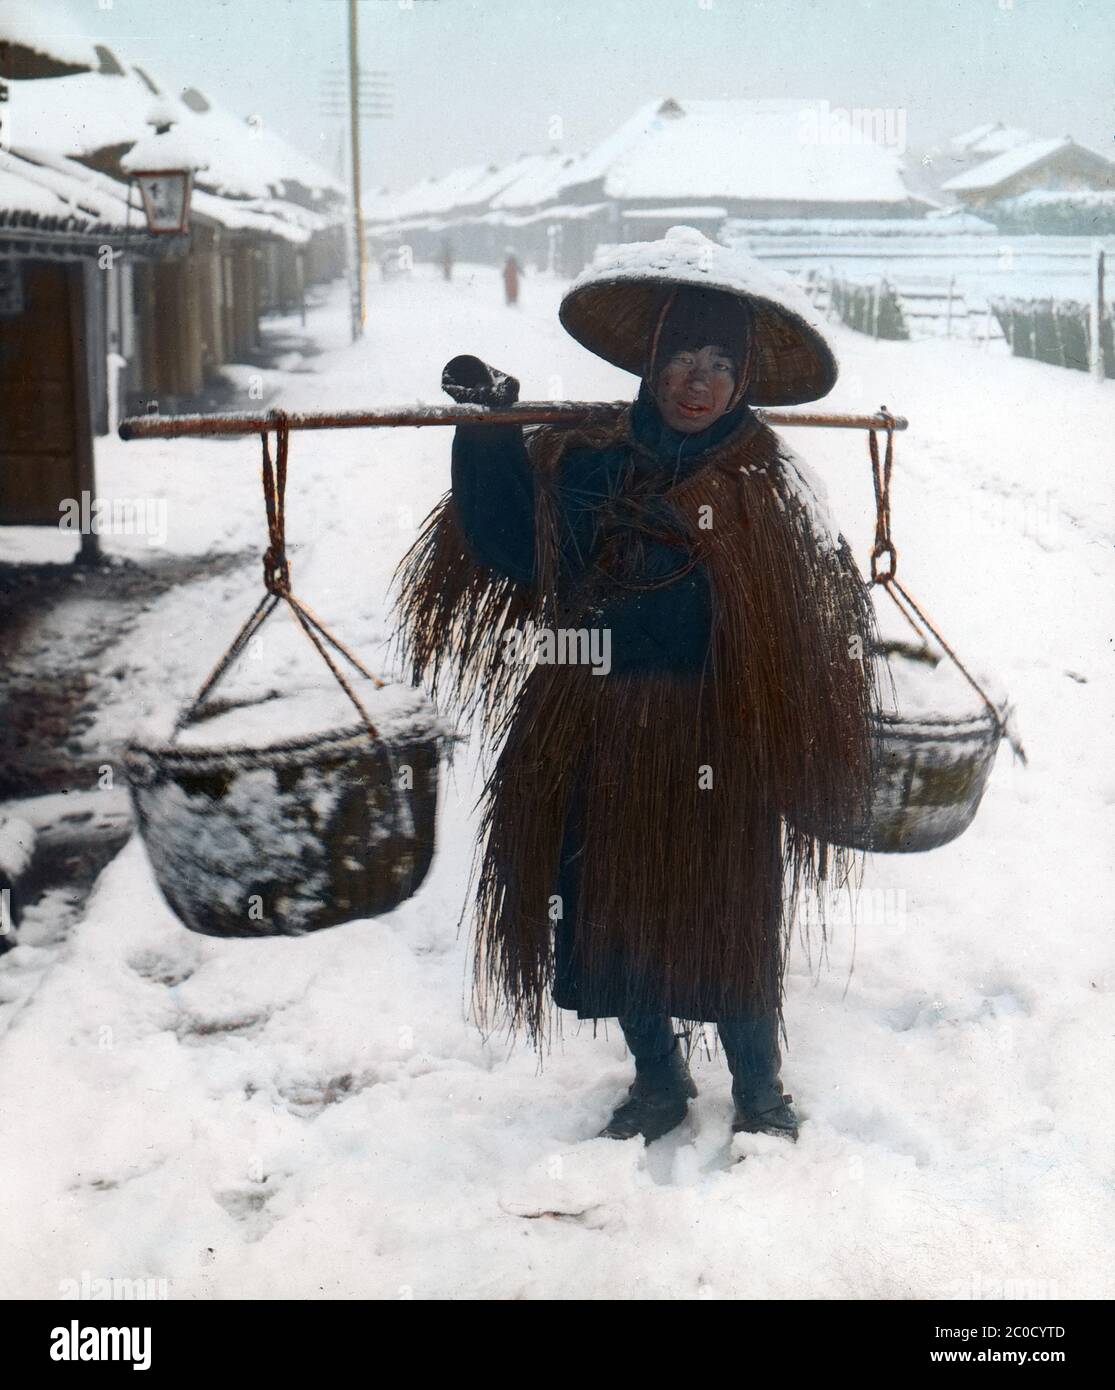 [ 1900s Japan - Japanese Salt Vendor ] — A salt peddler in the snow, wearing a straw raincoat (mino) and carrying a conical hat (菅笠, sugegasa).  20th century vintage glass slide. Stock Photo